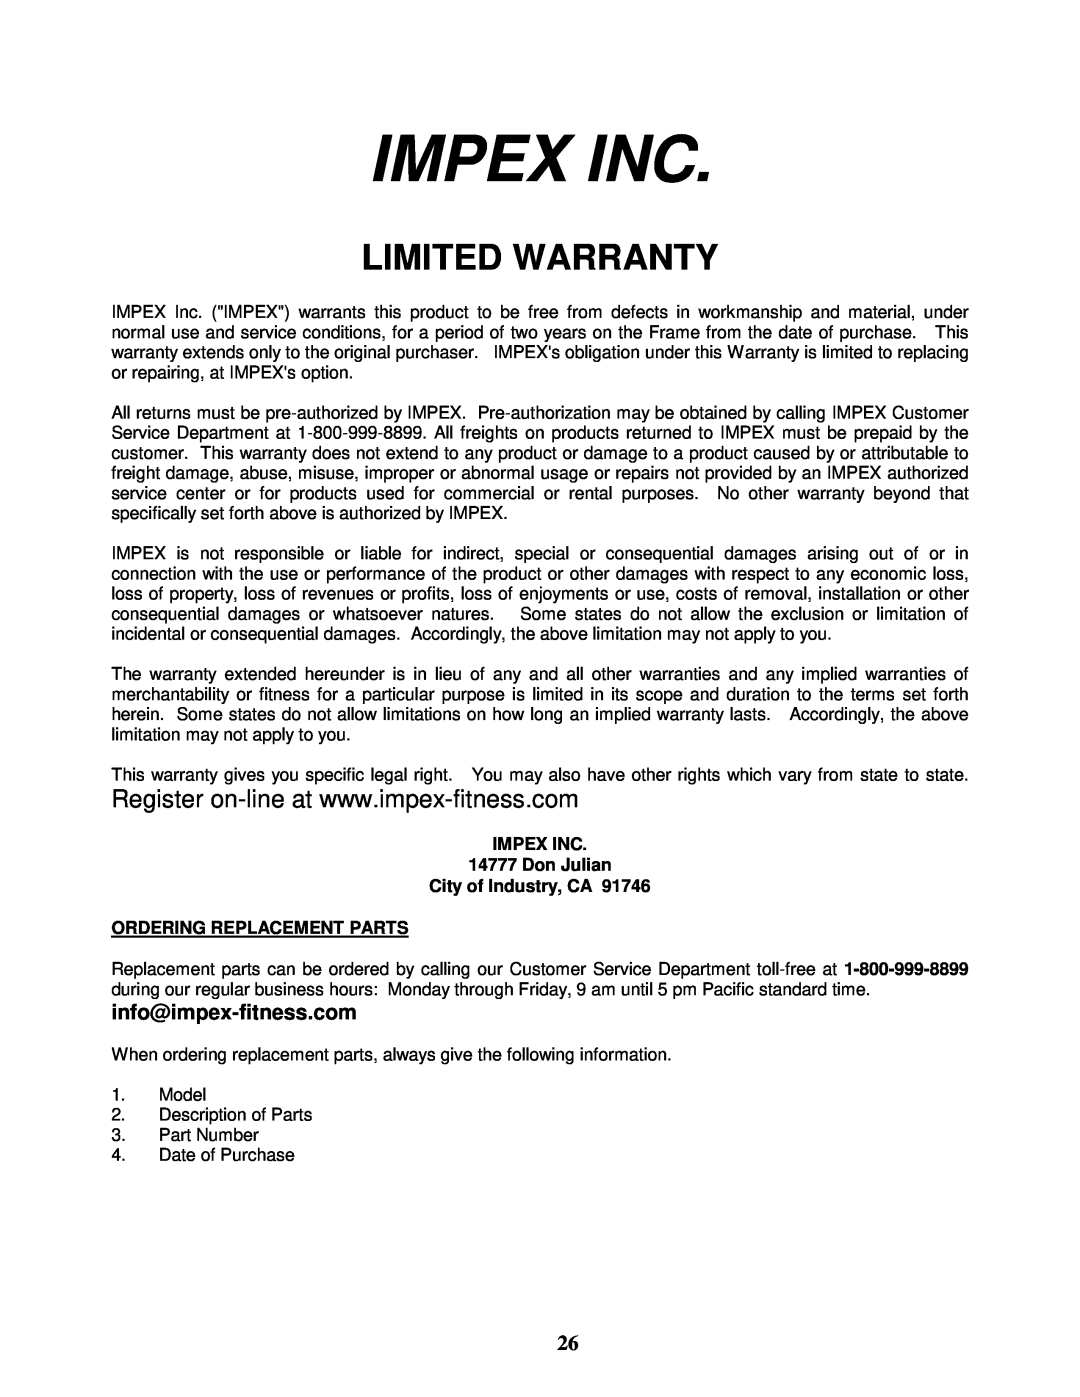 Impex PHE 2000 Impex Inc, Limited Warranty, IMPEX INC 14777 Don Julian City of Industry, CA, Ordering Replacement Parts 